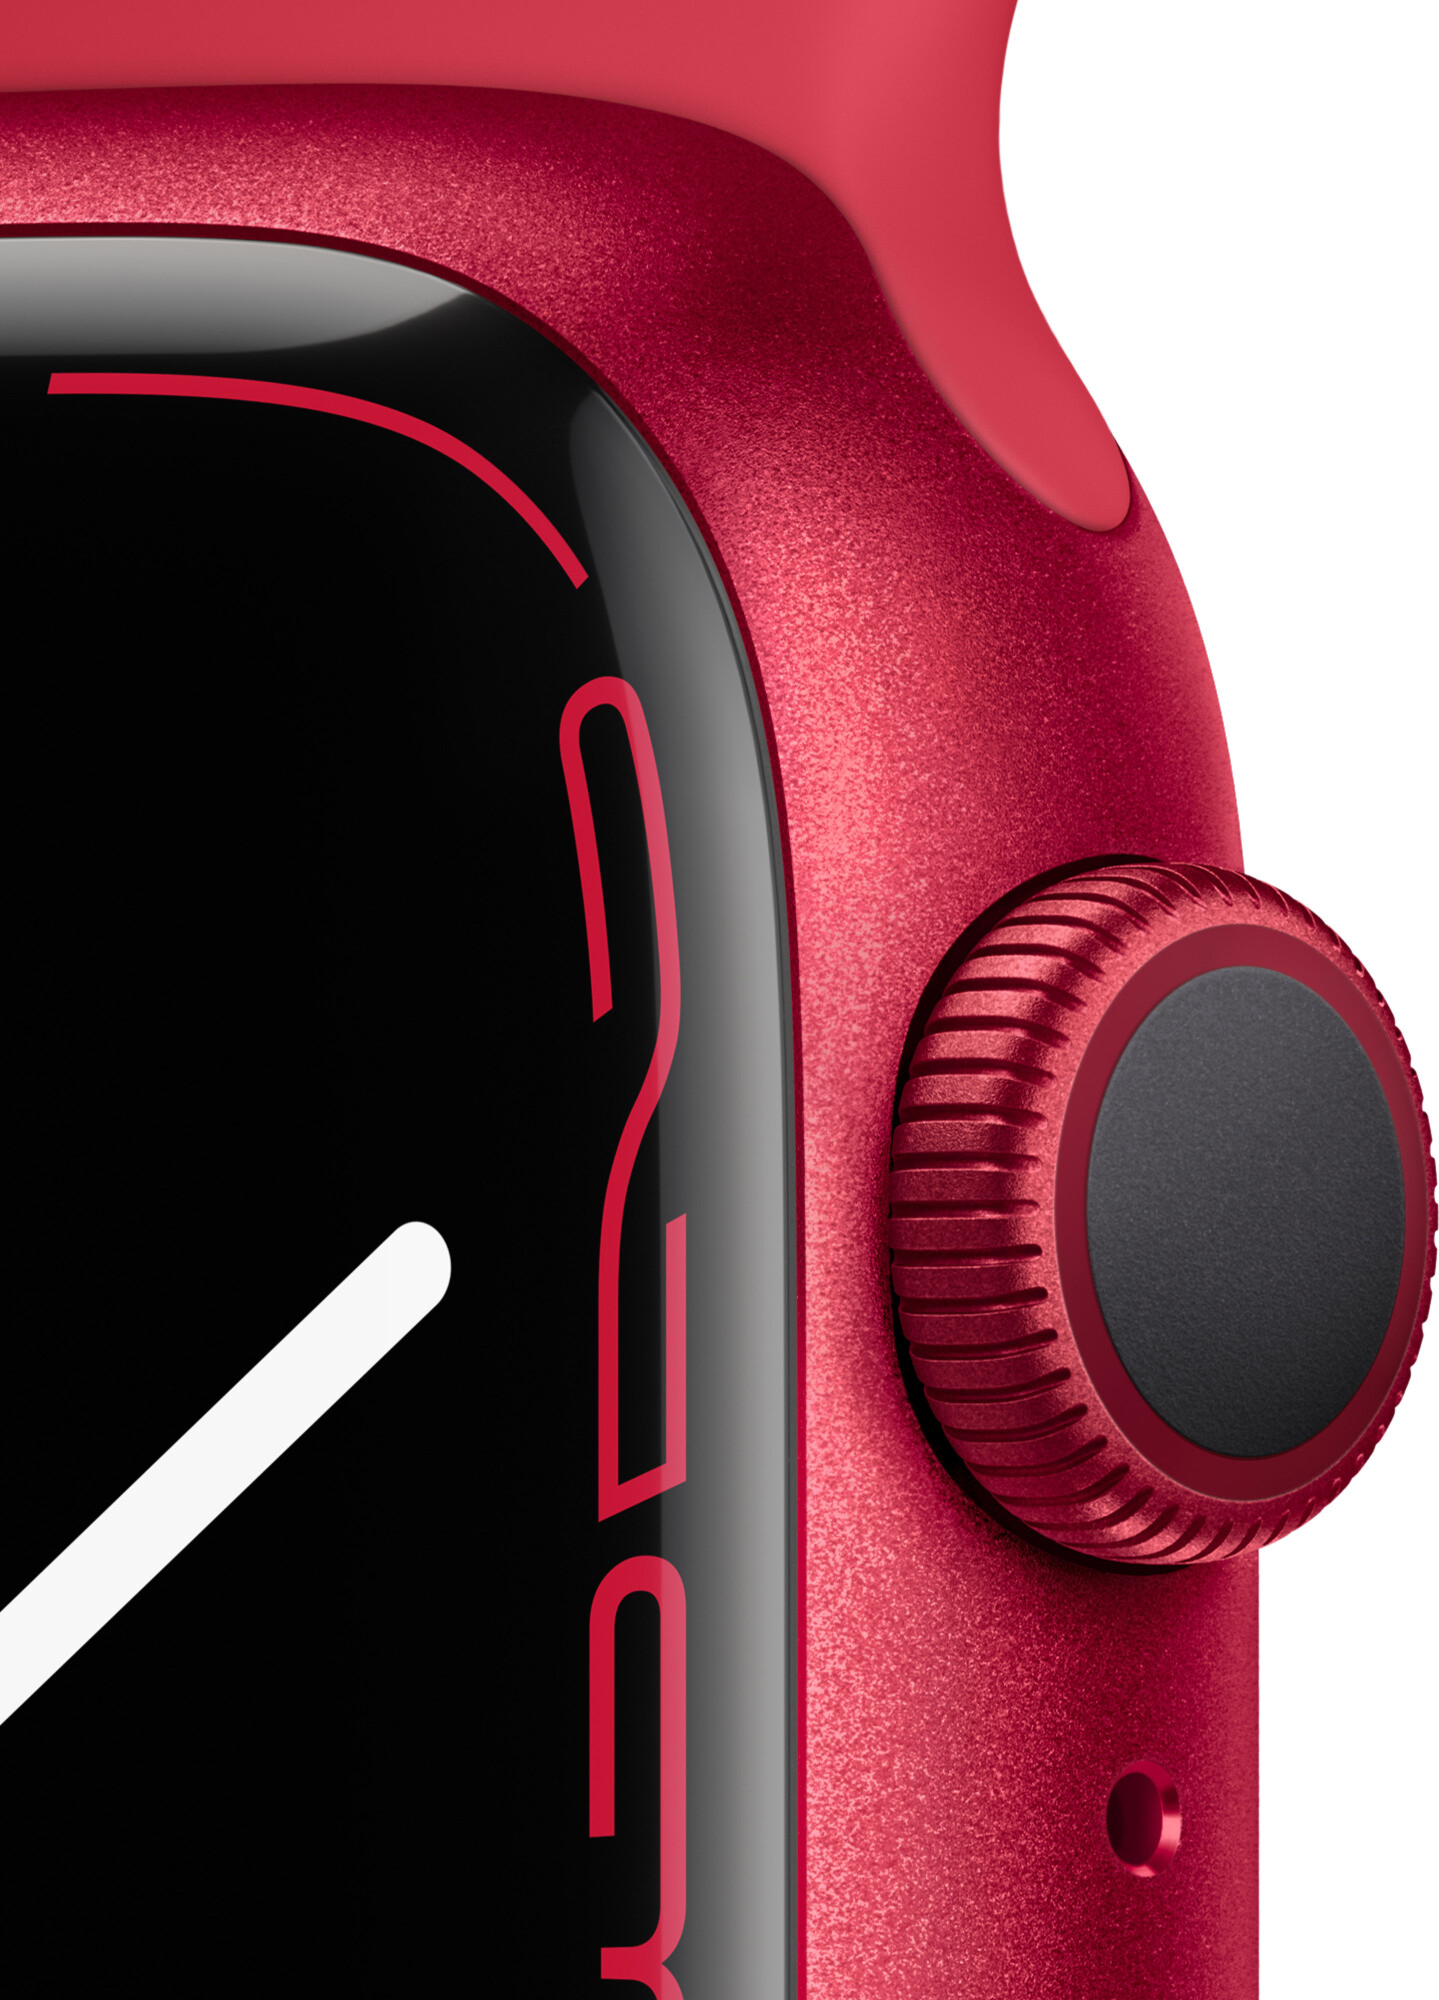 Apple Watch Series 7 GPS 45mm PRODUCT RED Aluminum Case With PRODUCT RED Sport Band (MKN93) 